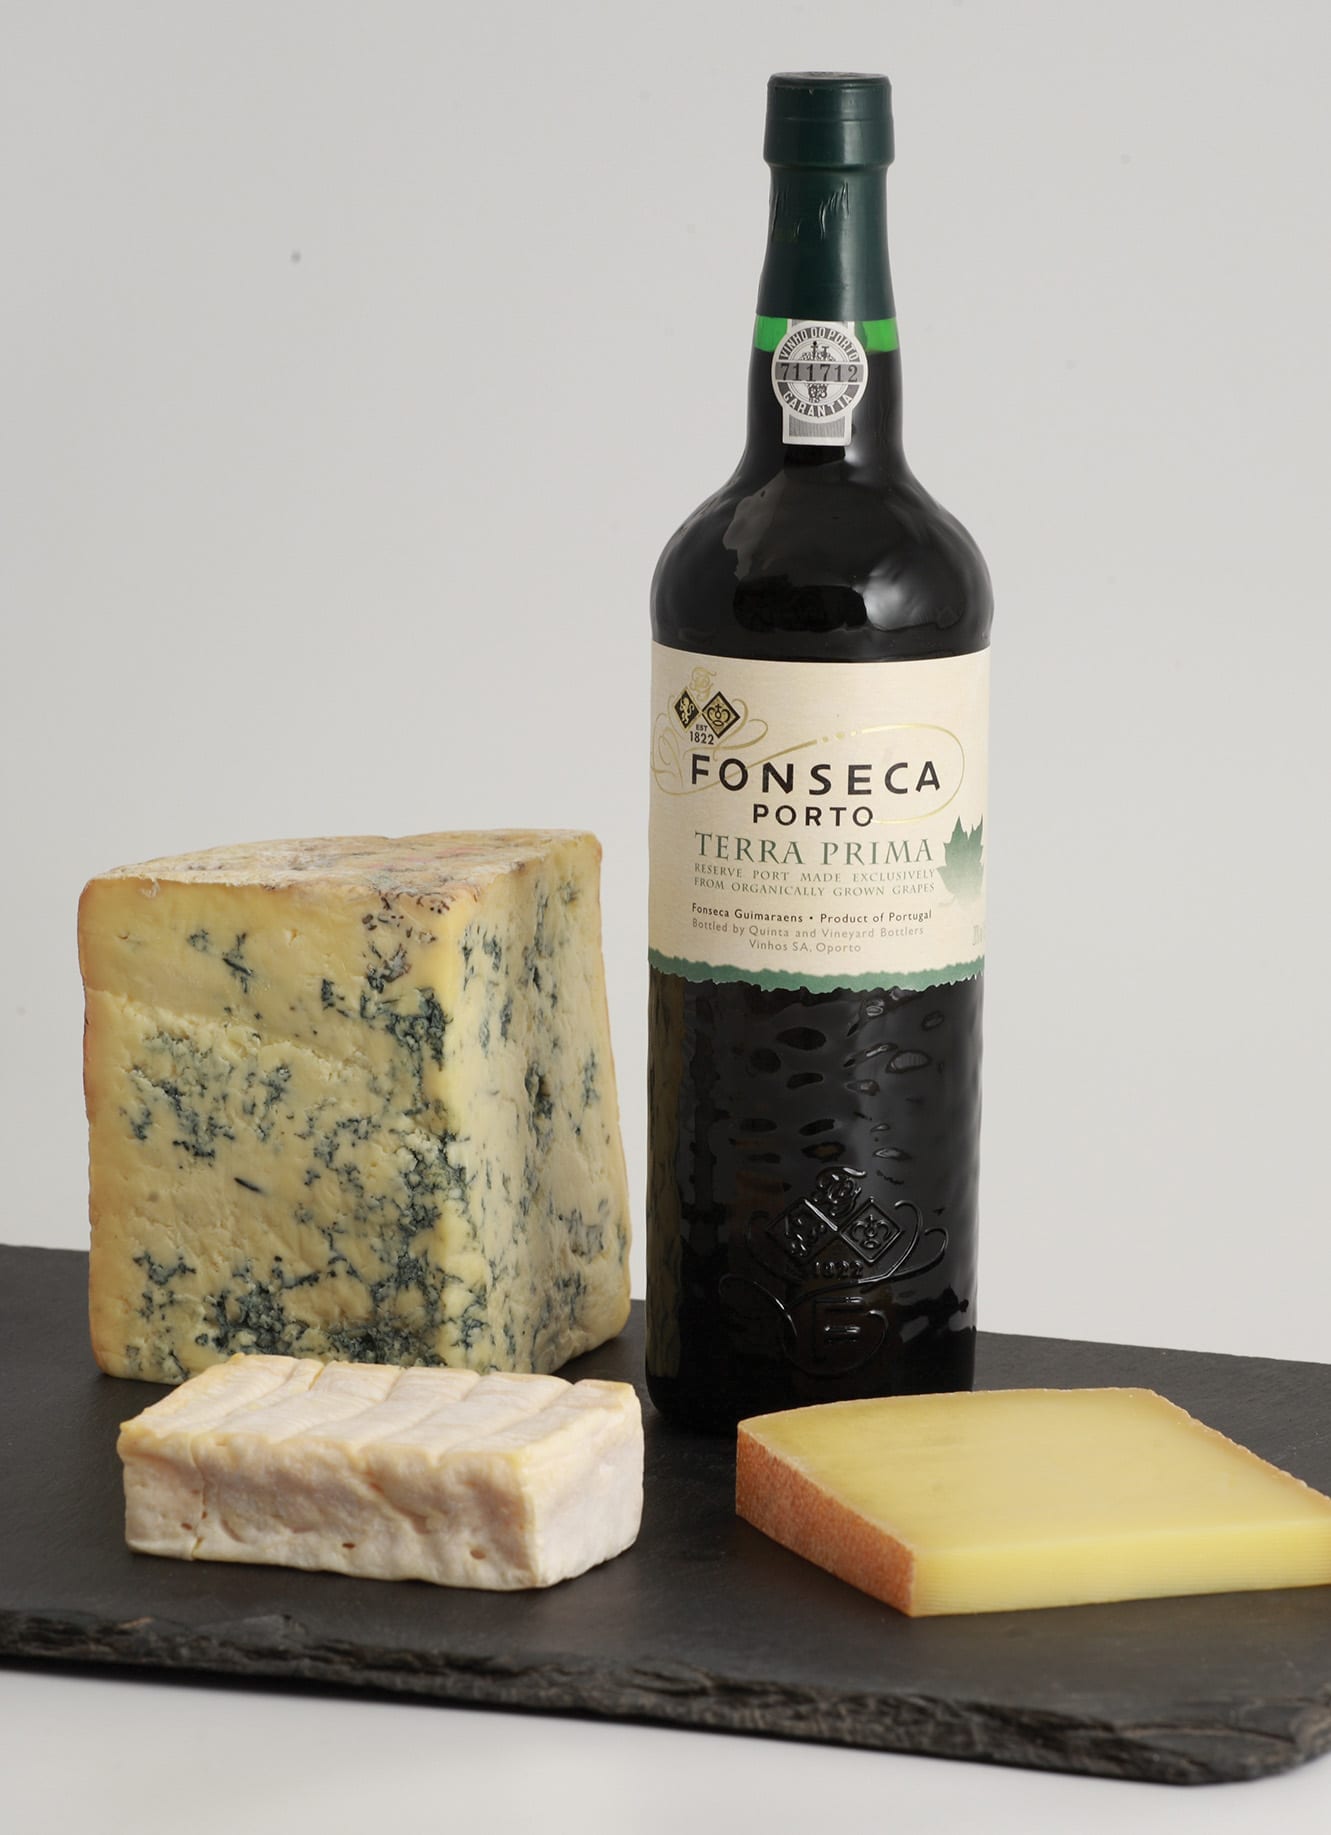 Port wine, Fonseca, cheese, wine and cheese pairing, port bottle